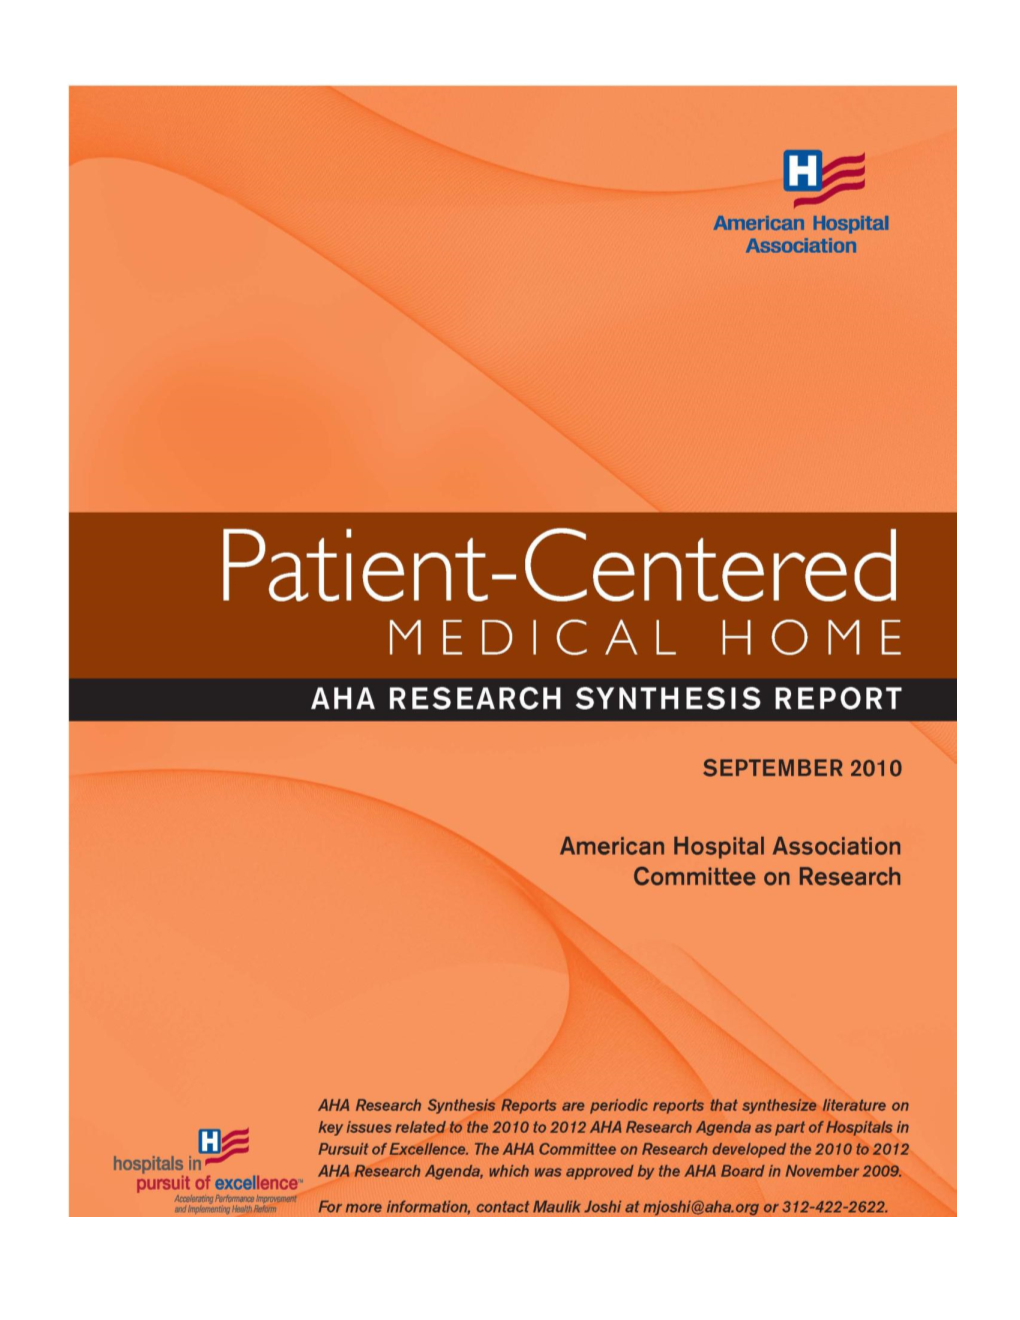 Patient-Centered Medical Home (PCMH): AHA Research Synthesis